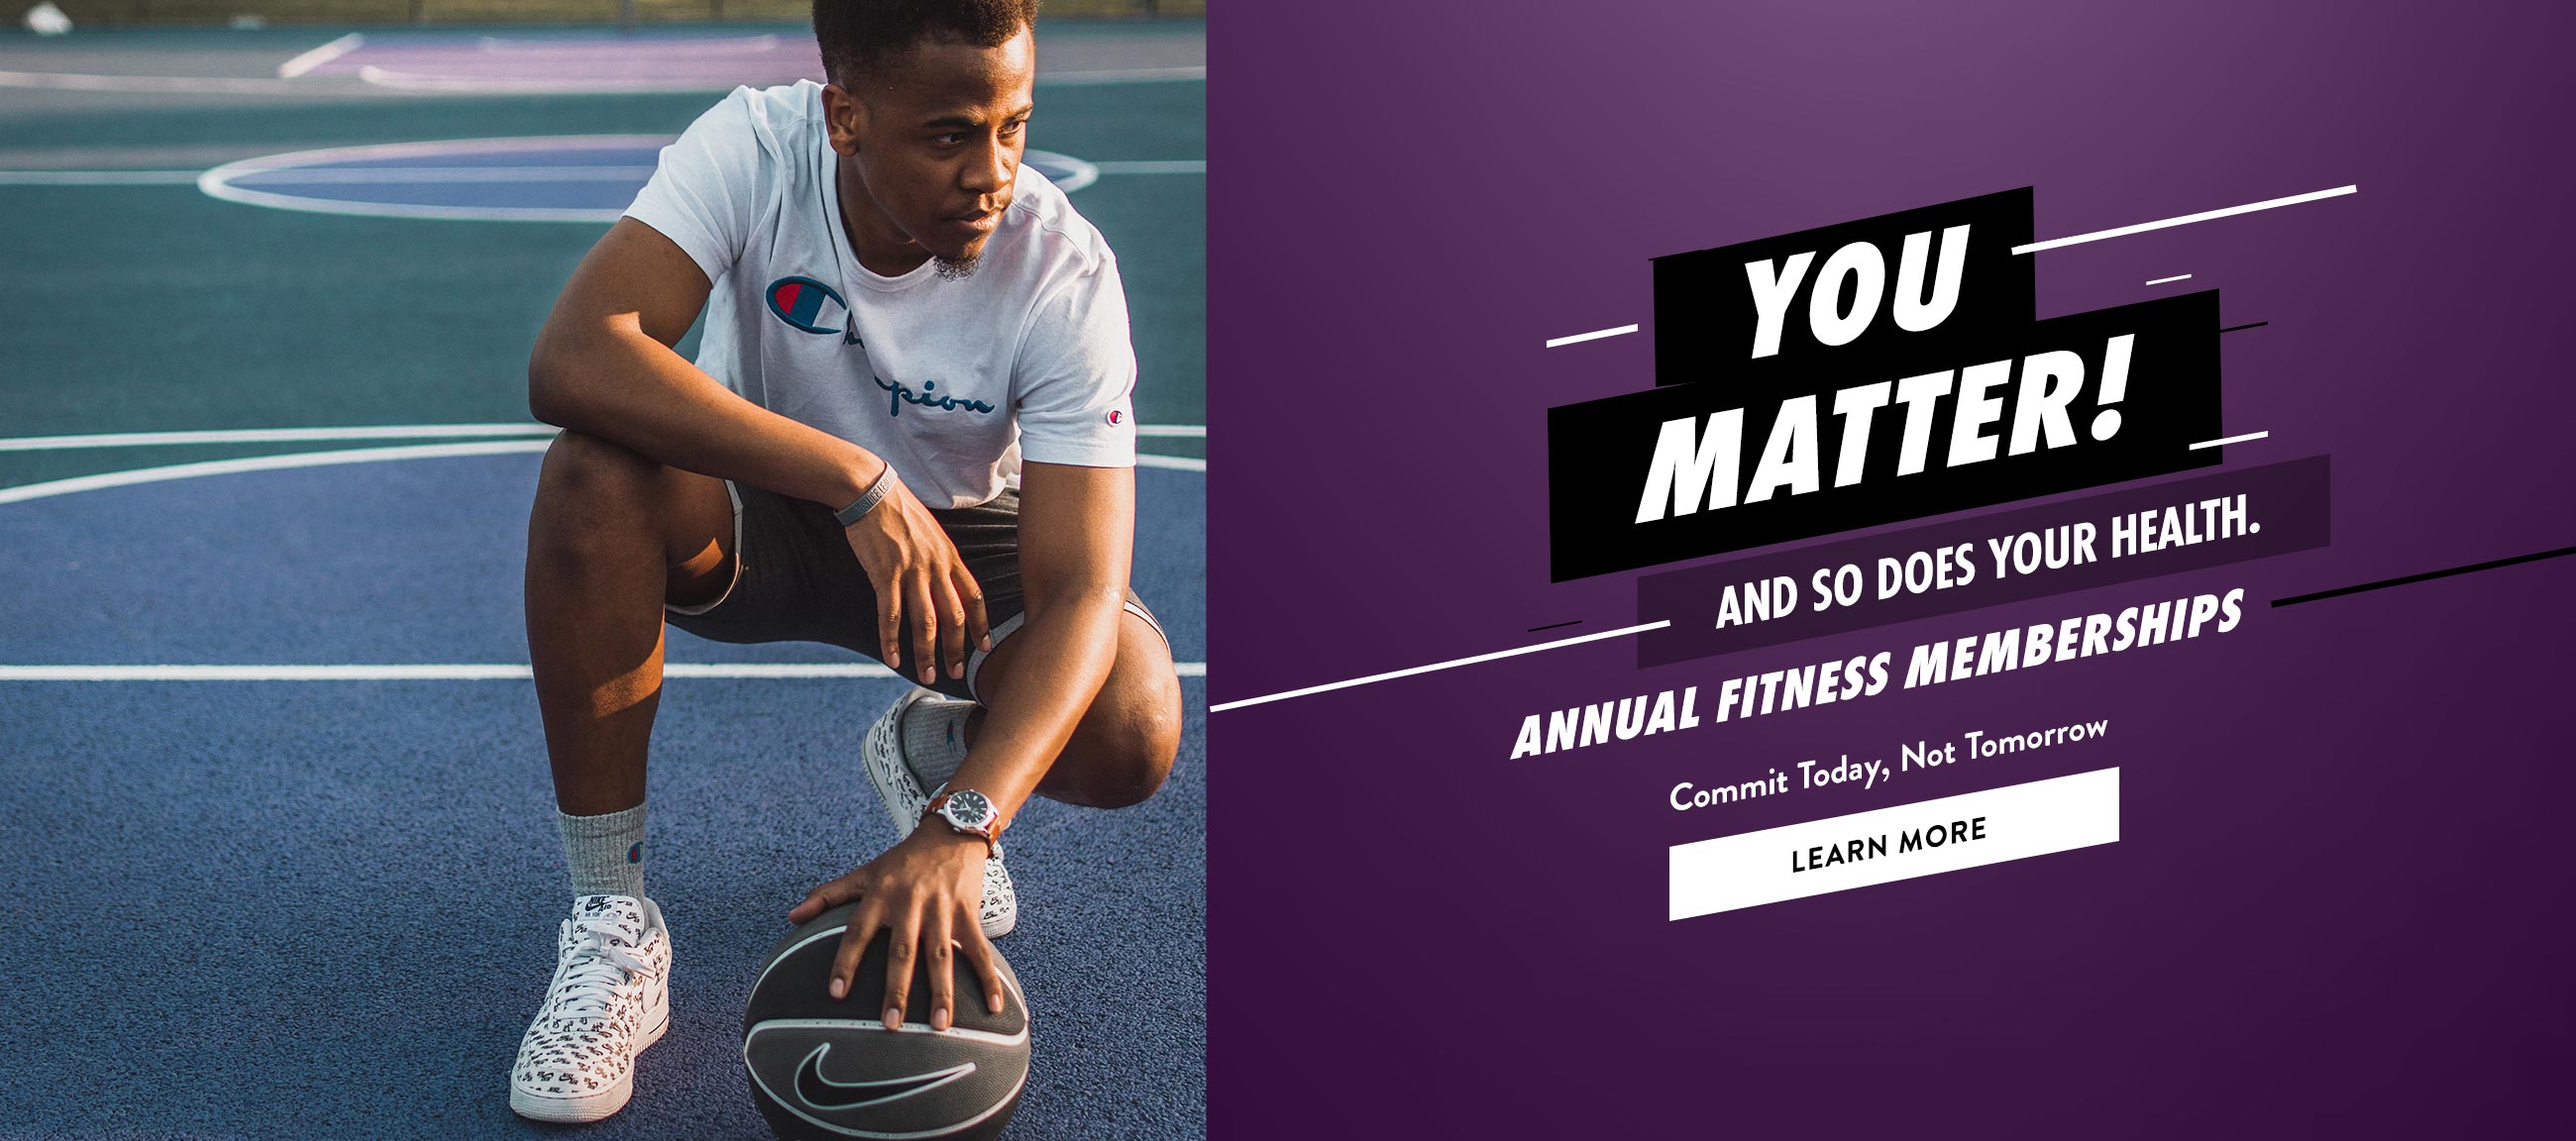 You Matter! And so does your health. Annual Fitness Memberships. commit today, not tomorrow